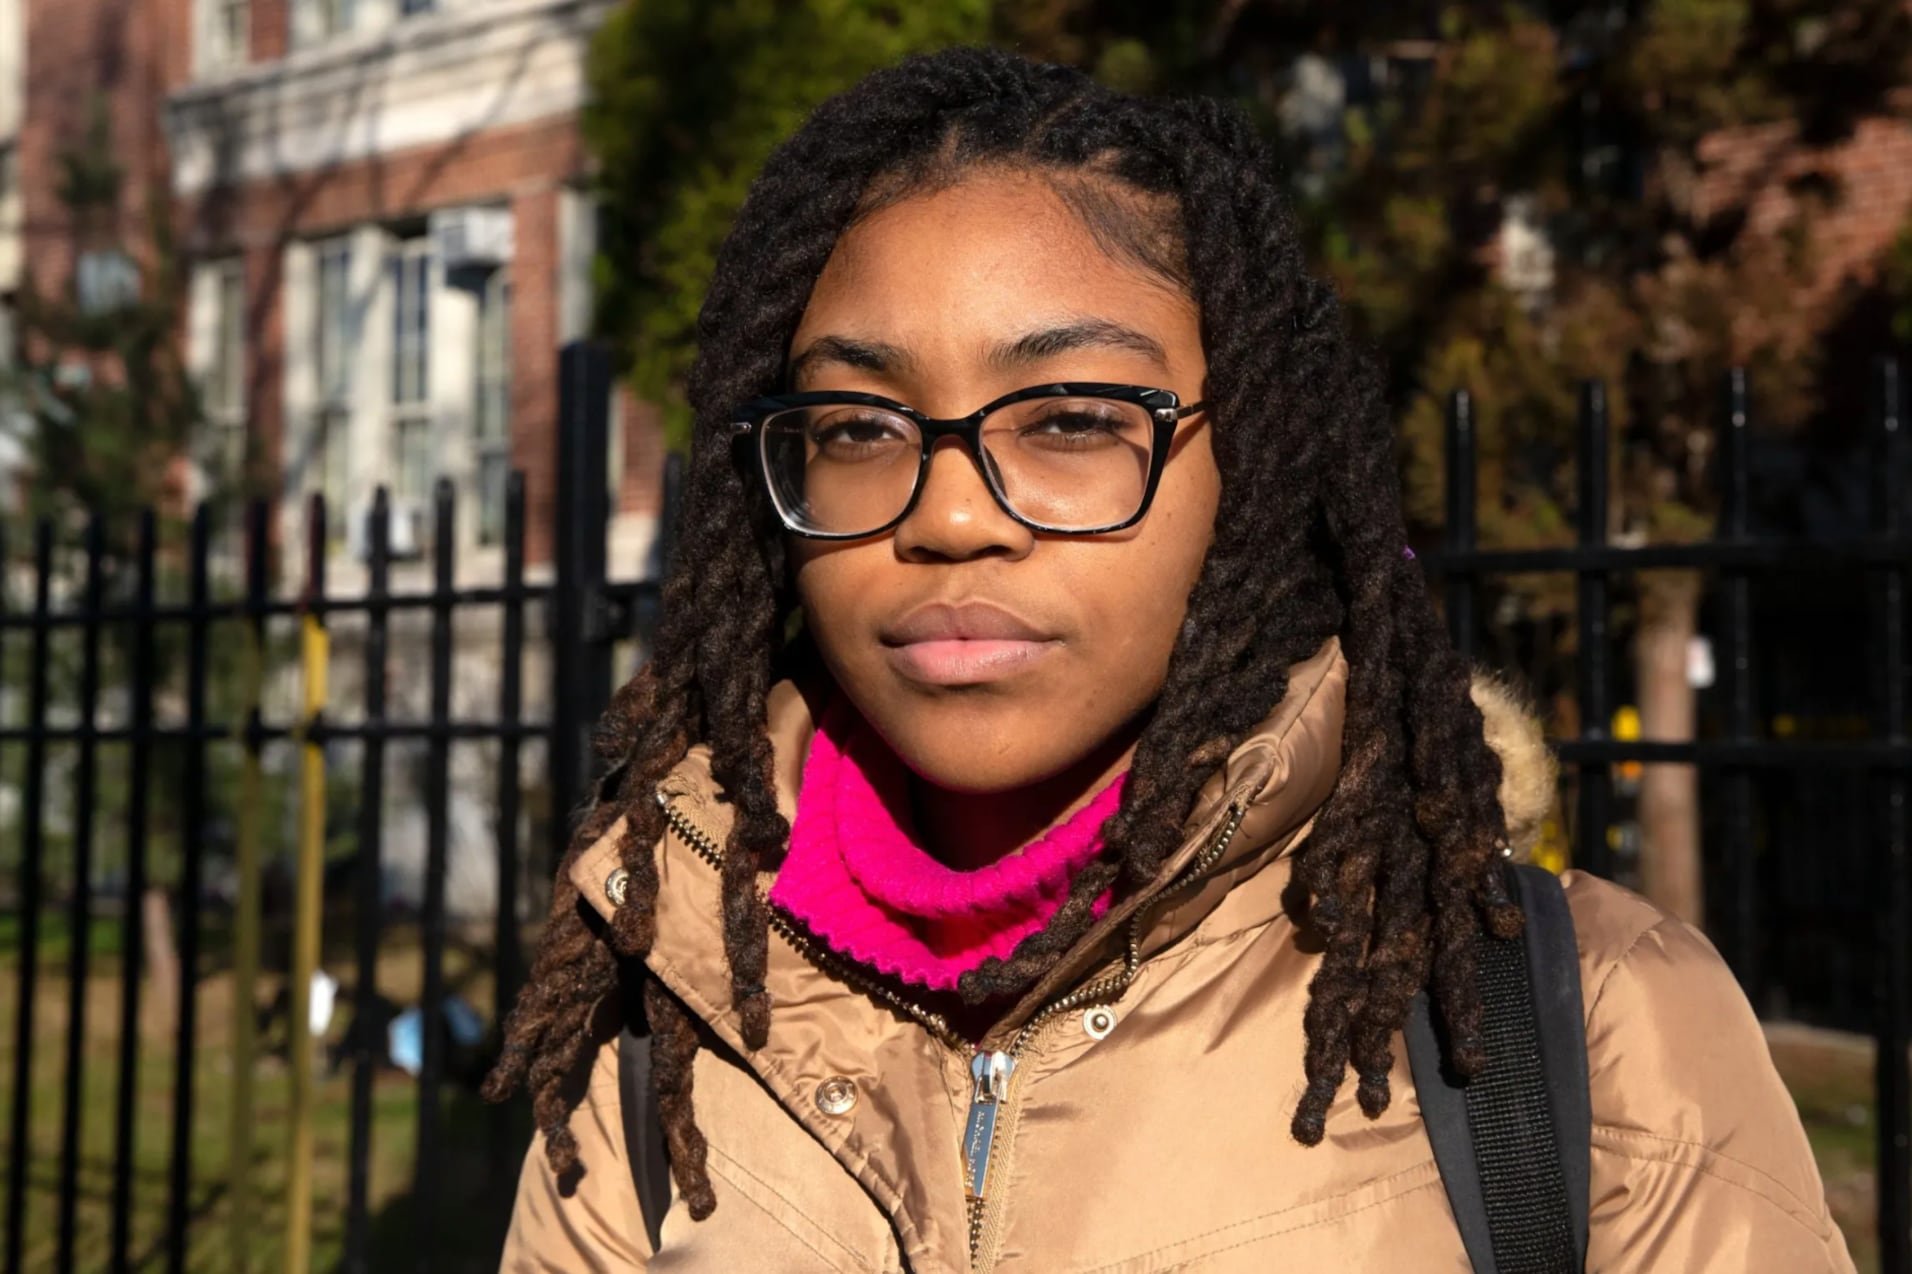 A girl with glasses, a pink scarf, and tan coat looks at the camera.